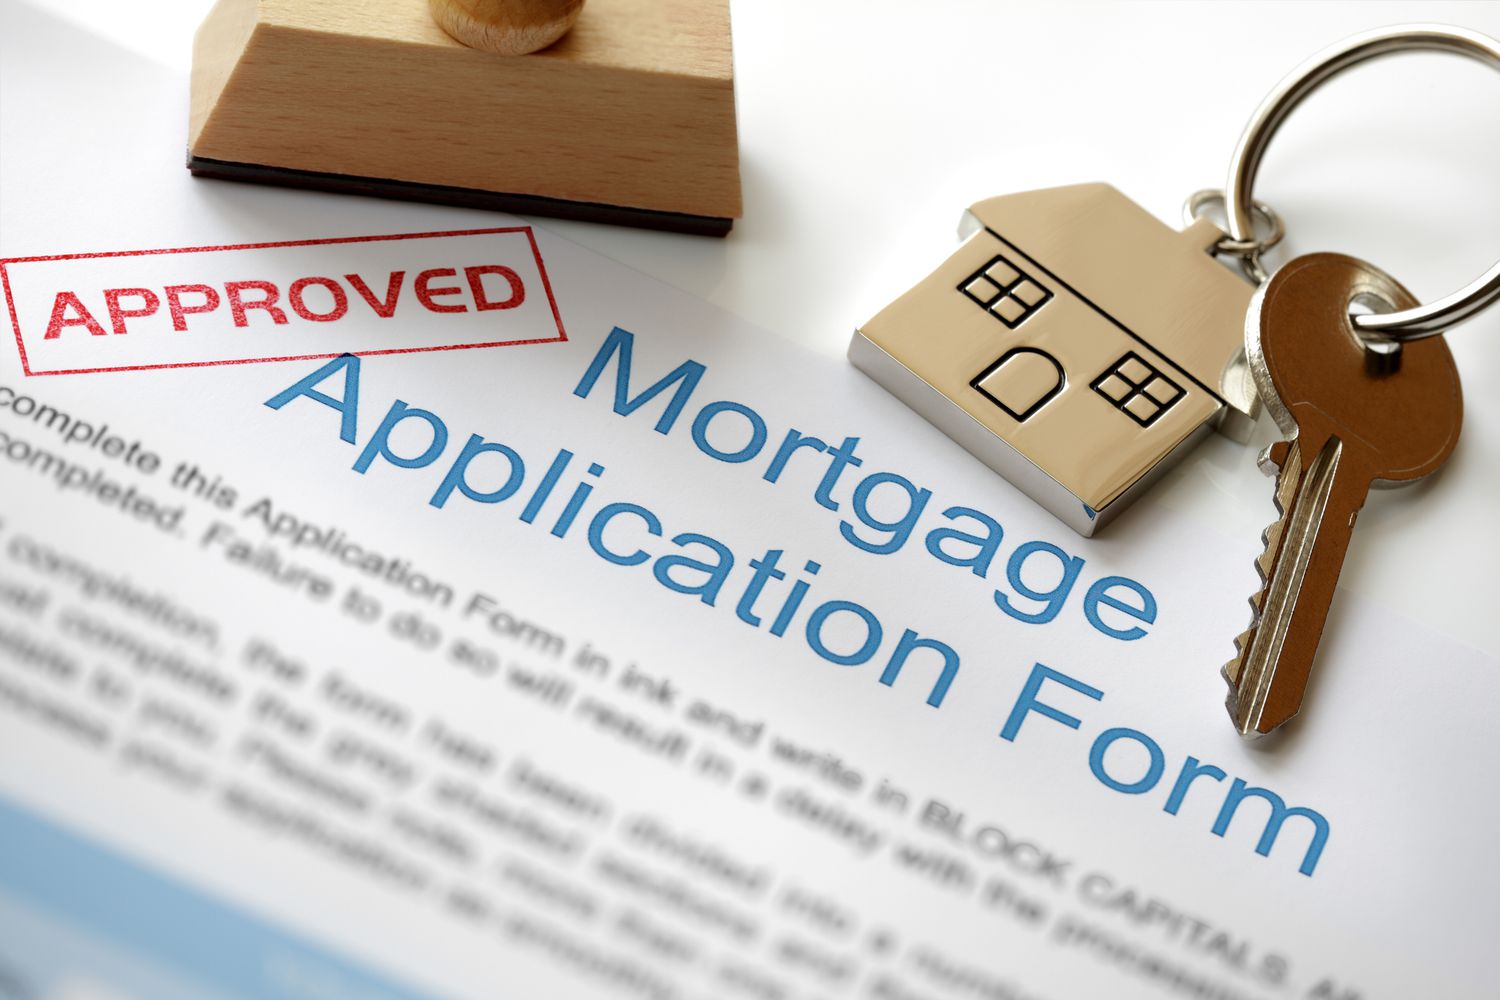 How To Apply For Mortgage Loan: Learn About The Mortgage Loan Application!